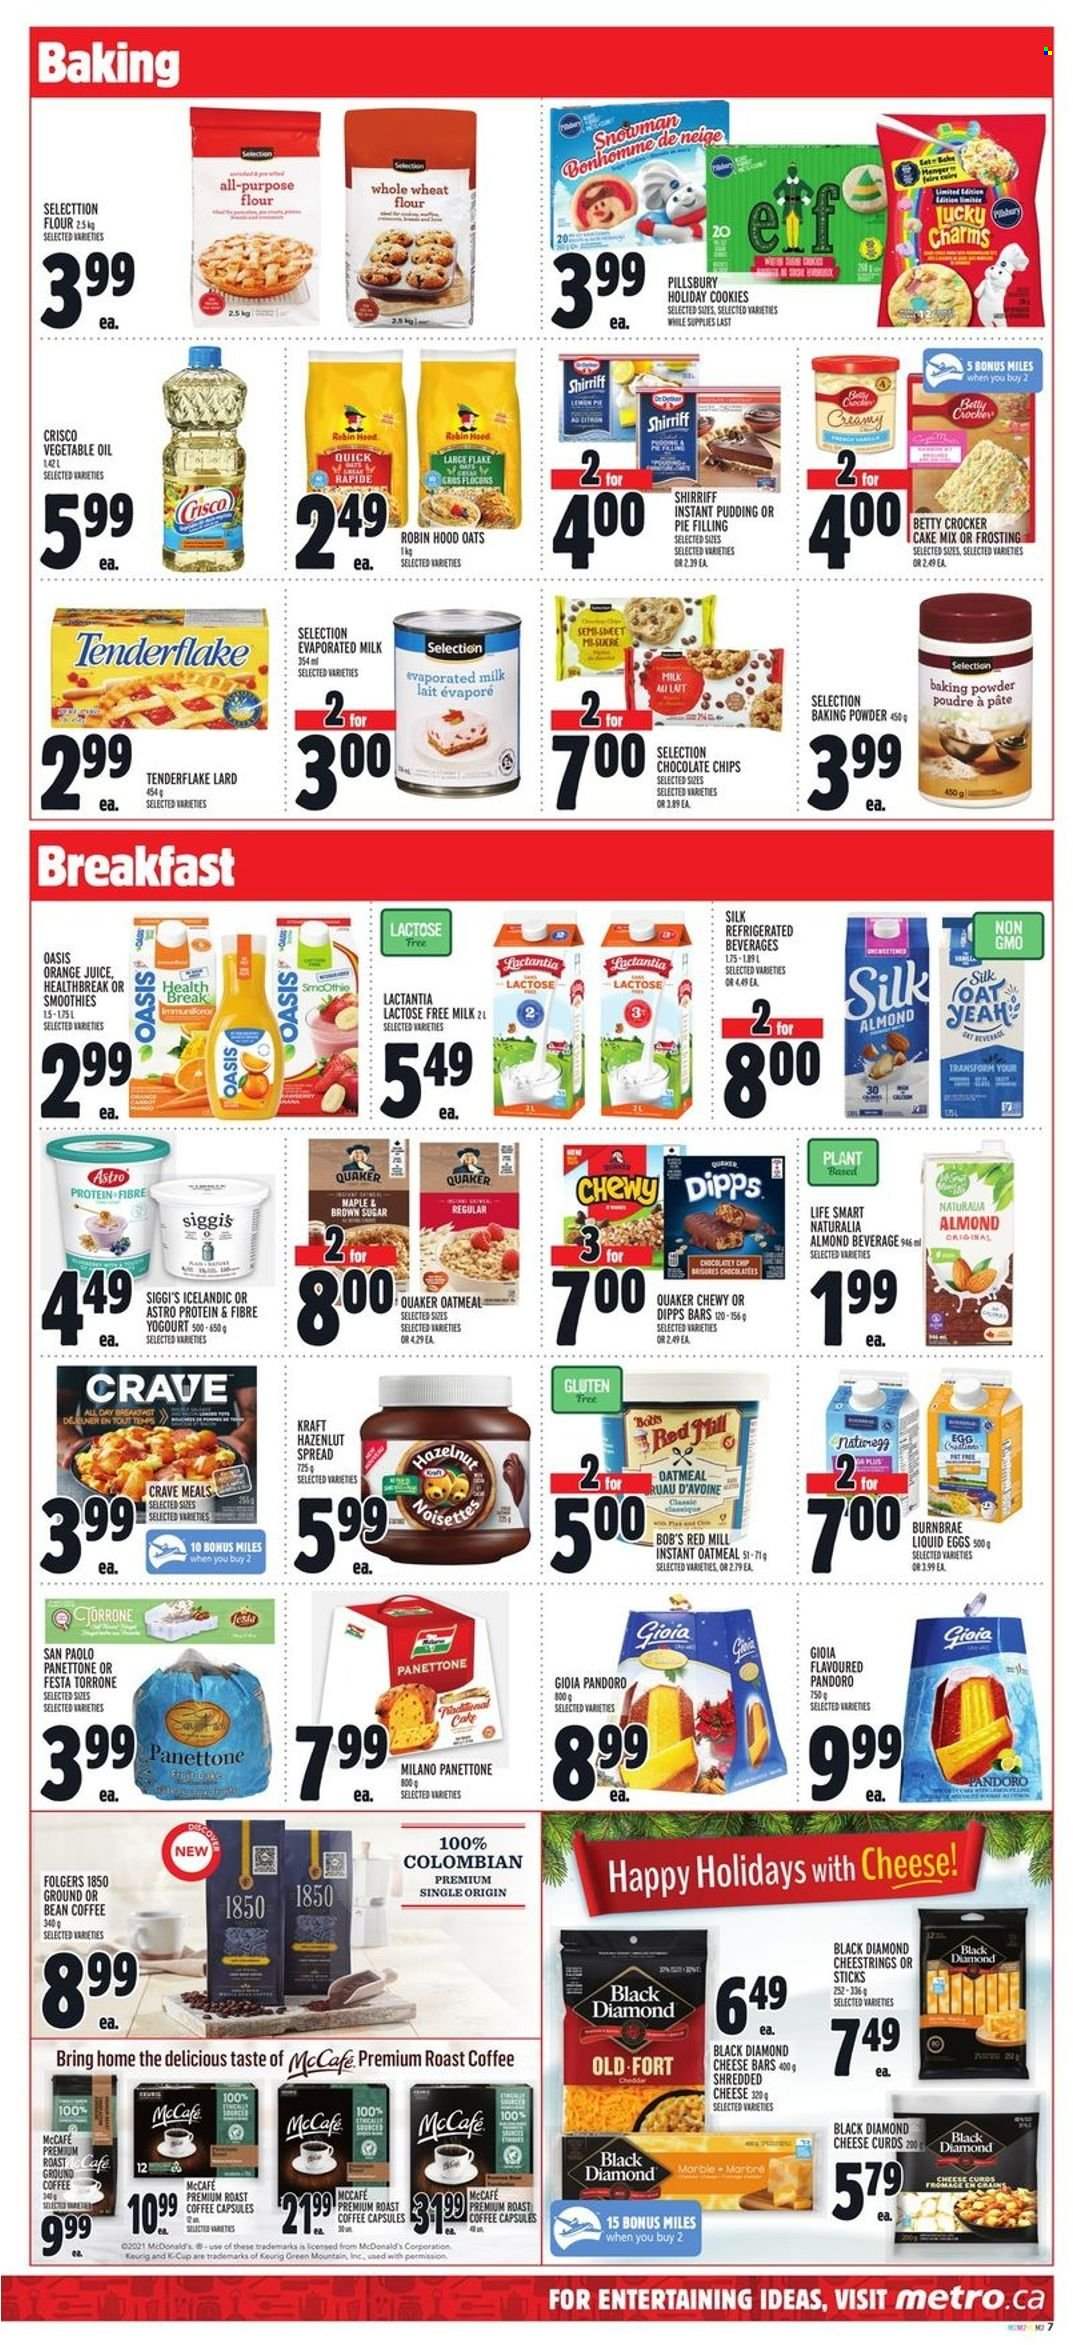 thumbnail - Metro Flyer - November 25, 2021 - December 01, 2021 - Sales products - panettone, cake mix, Pillsbury, Quaker, Kraft®, shredded cheese, string cheese, cheese curd, pudding, evaporated milk, lactose free milk, Silk, eggs, cookies, baking powder, Crisco, flour, frosting, wheat flour, whole wheat flour, pie filling, oatmeal, vegetable oil, oil, orange juice, juice, coffee, Folgers, ground coffee, coffee capsules, McCafe, K-Cups, Keurig, Green Mountain, lard. Page 9.